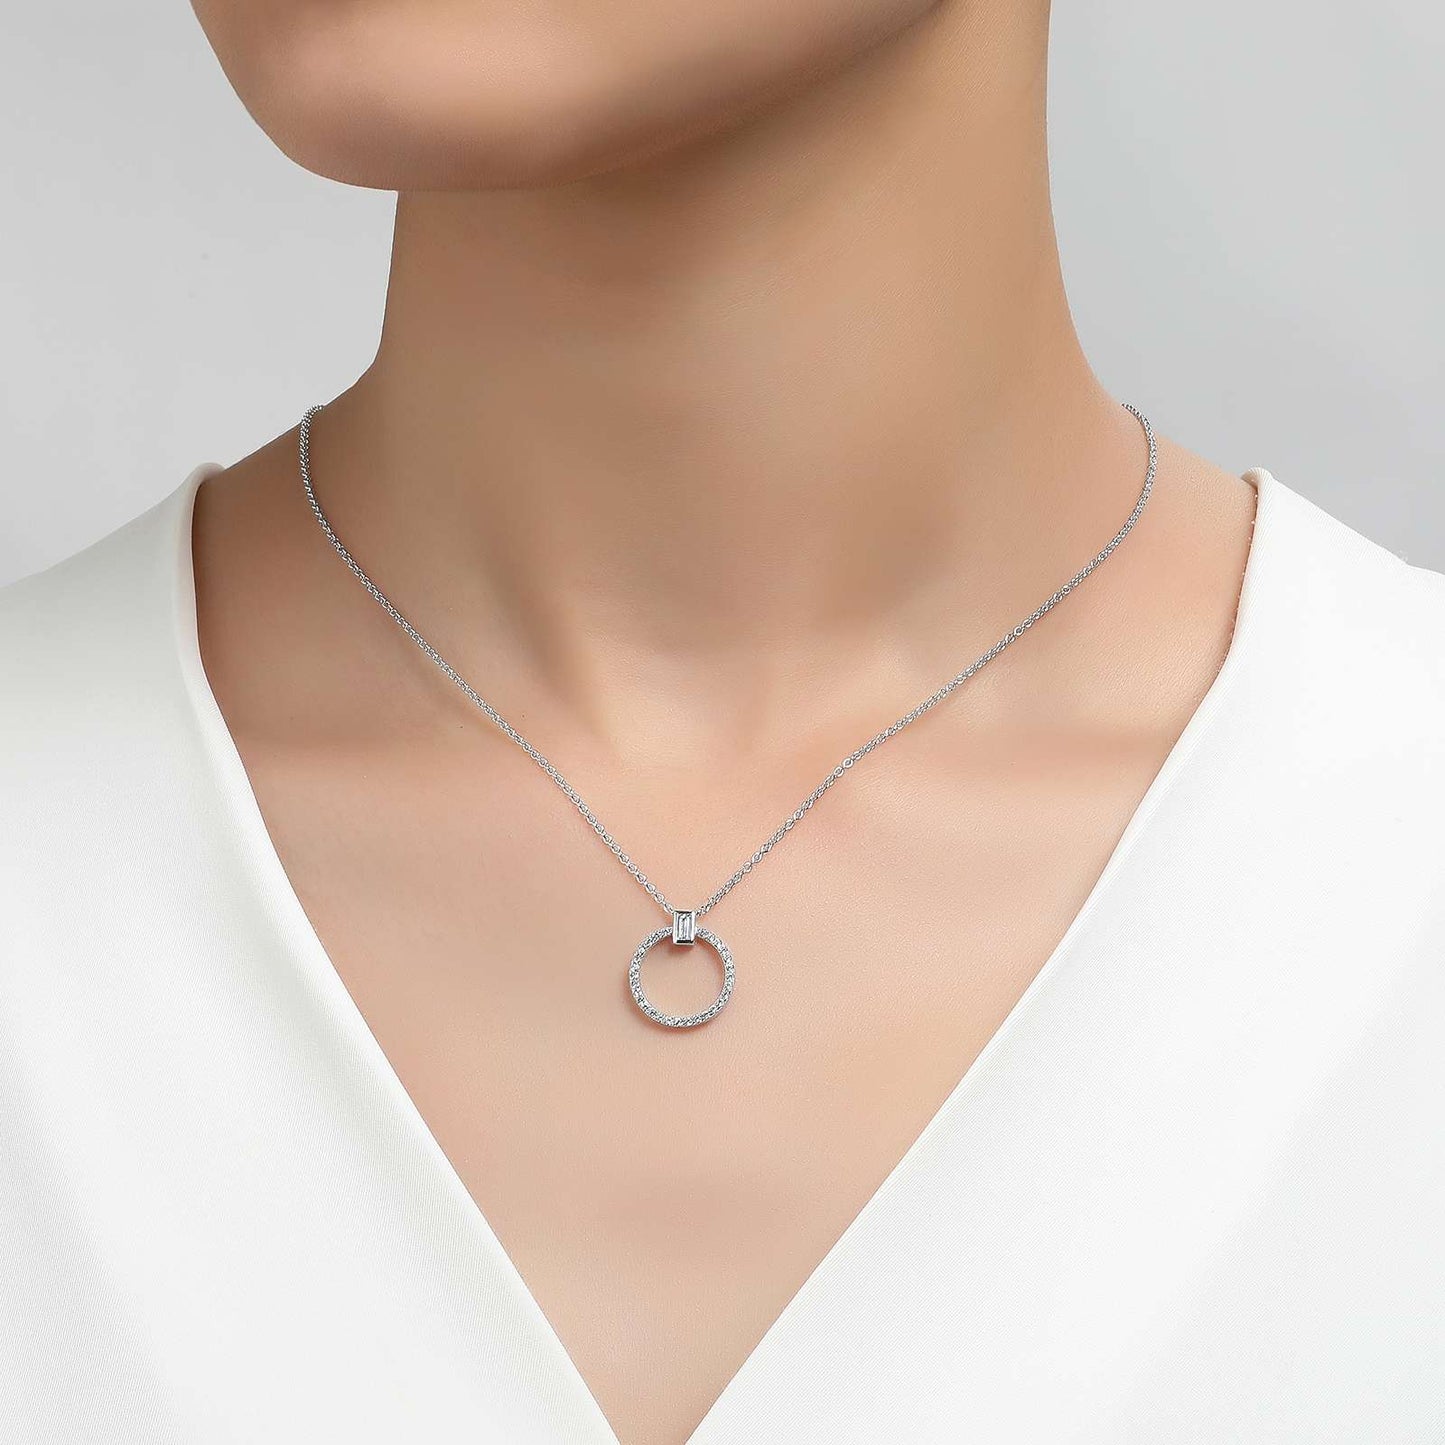 Open Circle Necklace | Lafonn | Luby 